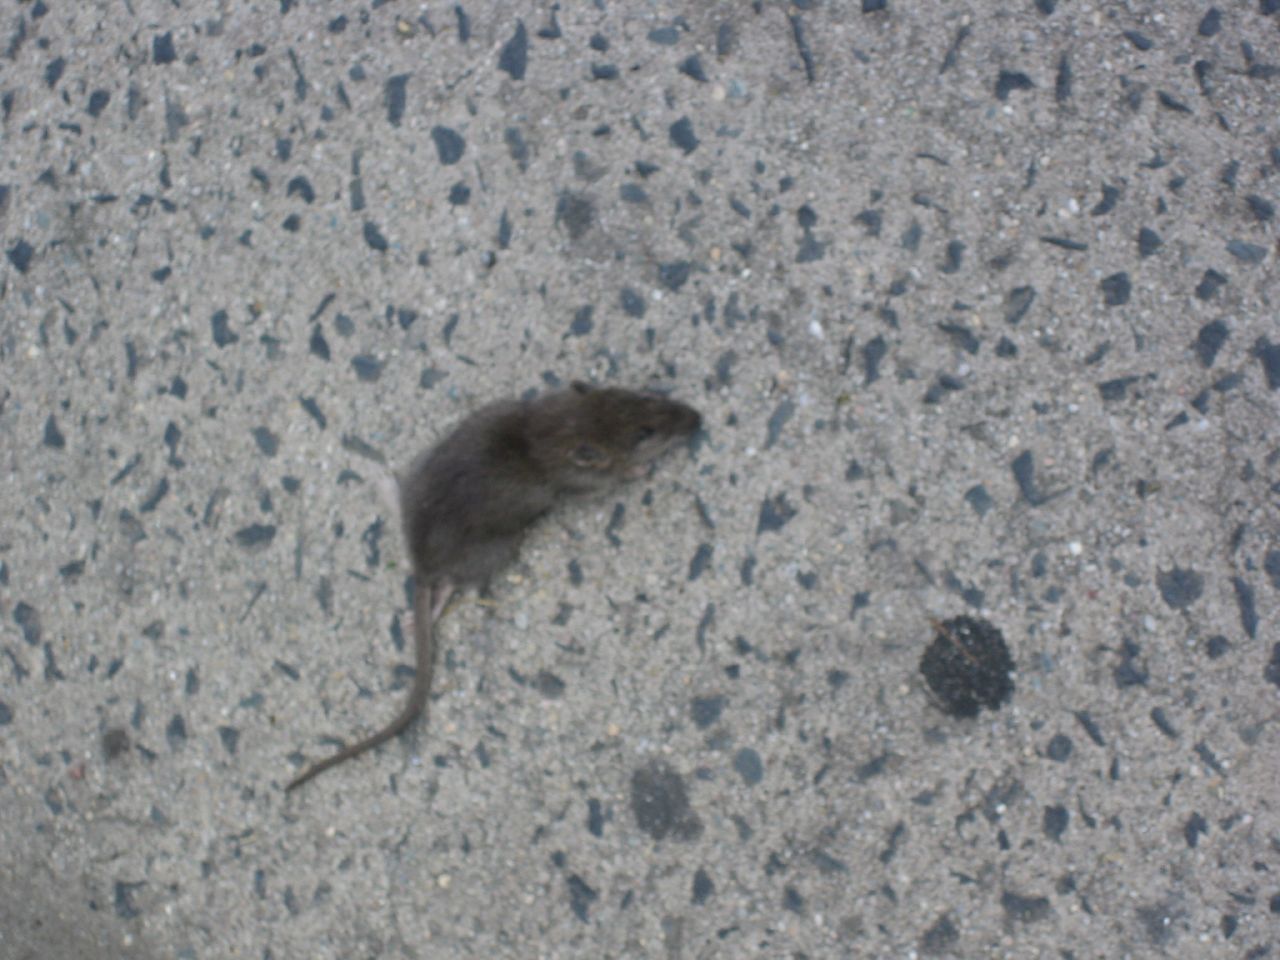 a small mouse on the street in front of a bus